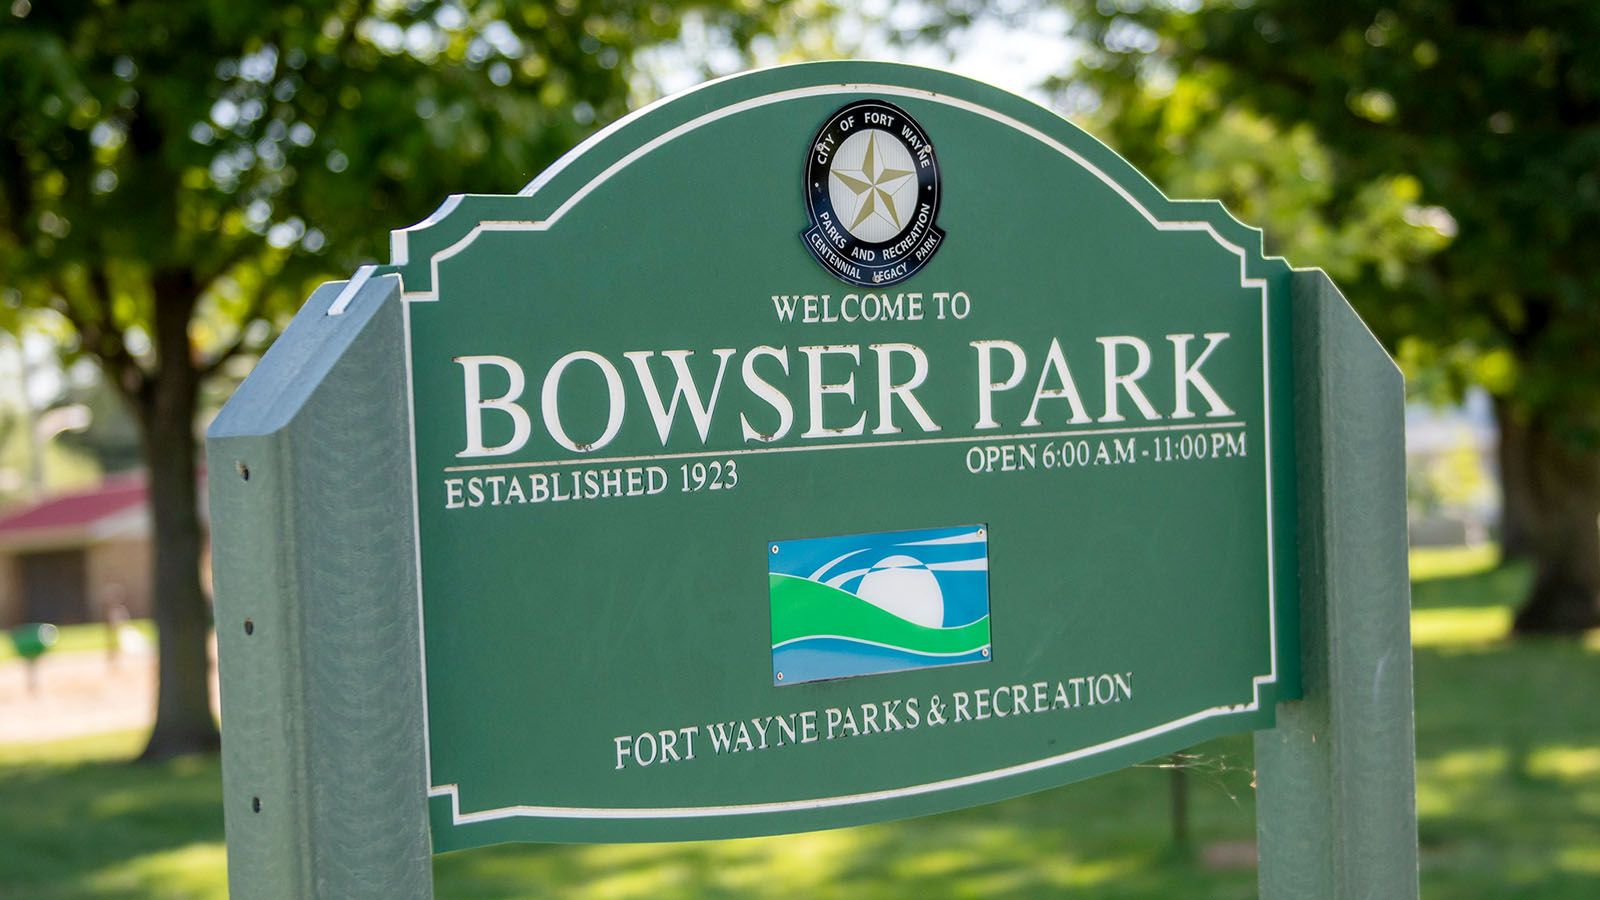 Bowser Park was recently recognized for its 100 years in Fort Wayne.